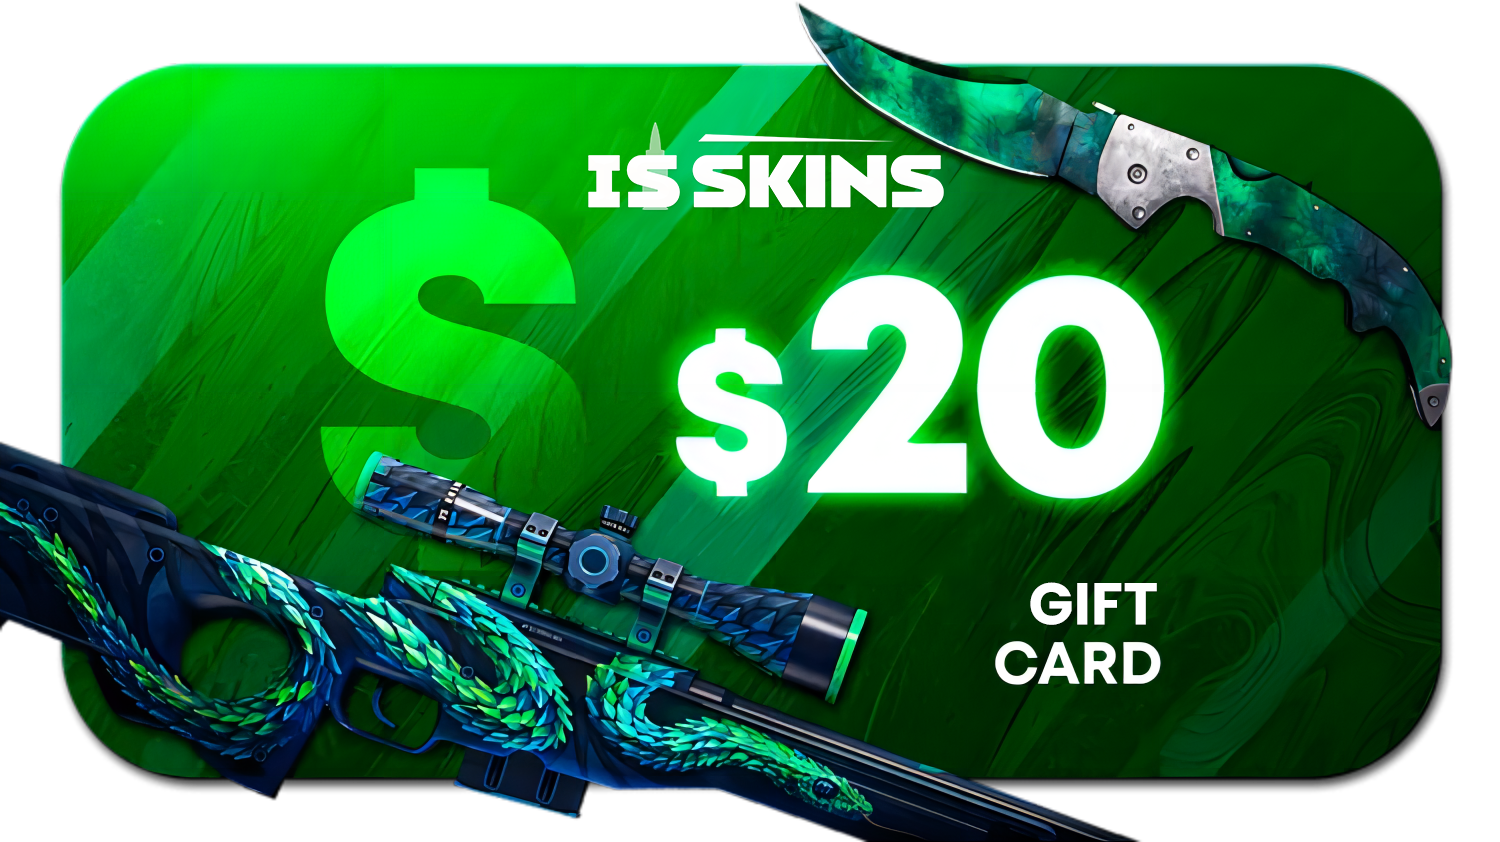 ISSKINS $20 Gift Card